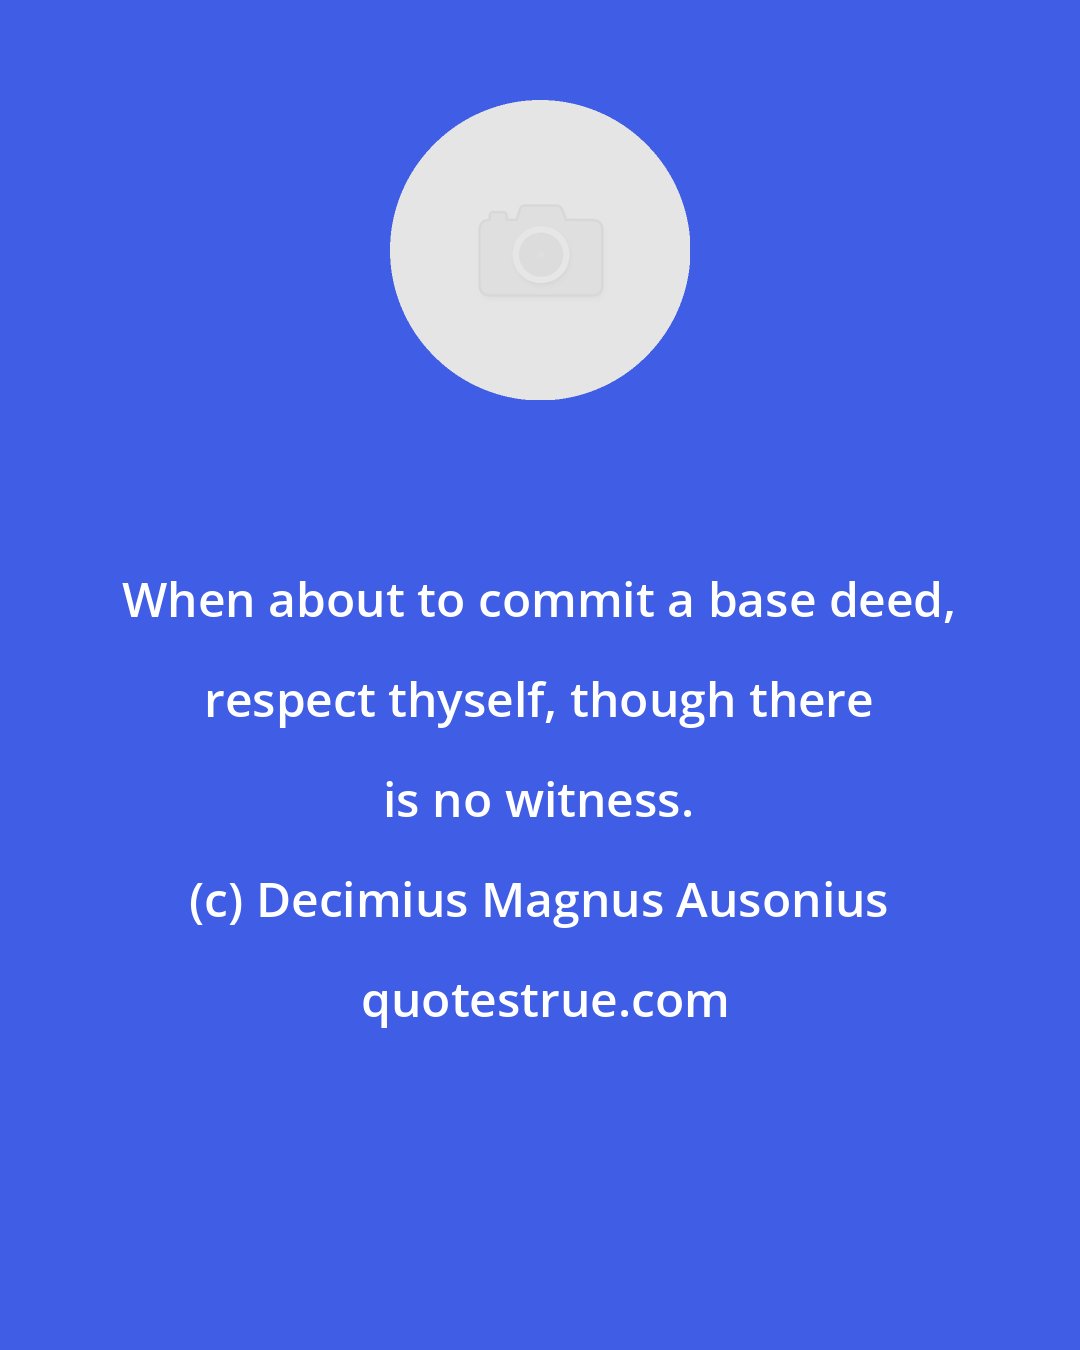 Decimius Magnus Ausonius: When about to commit a base deed, respect thyself, though there is no witness.